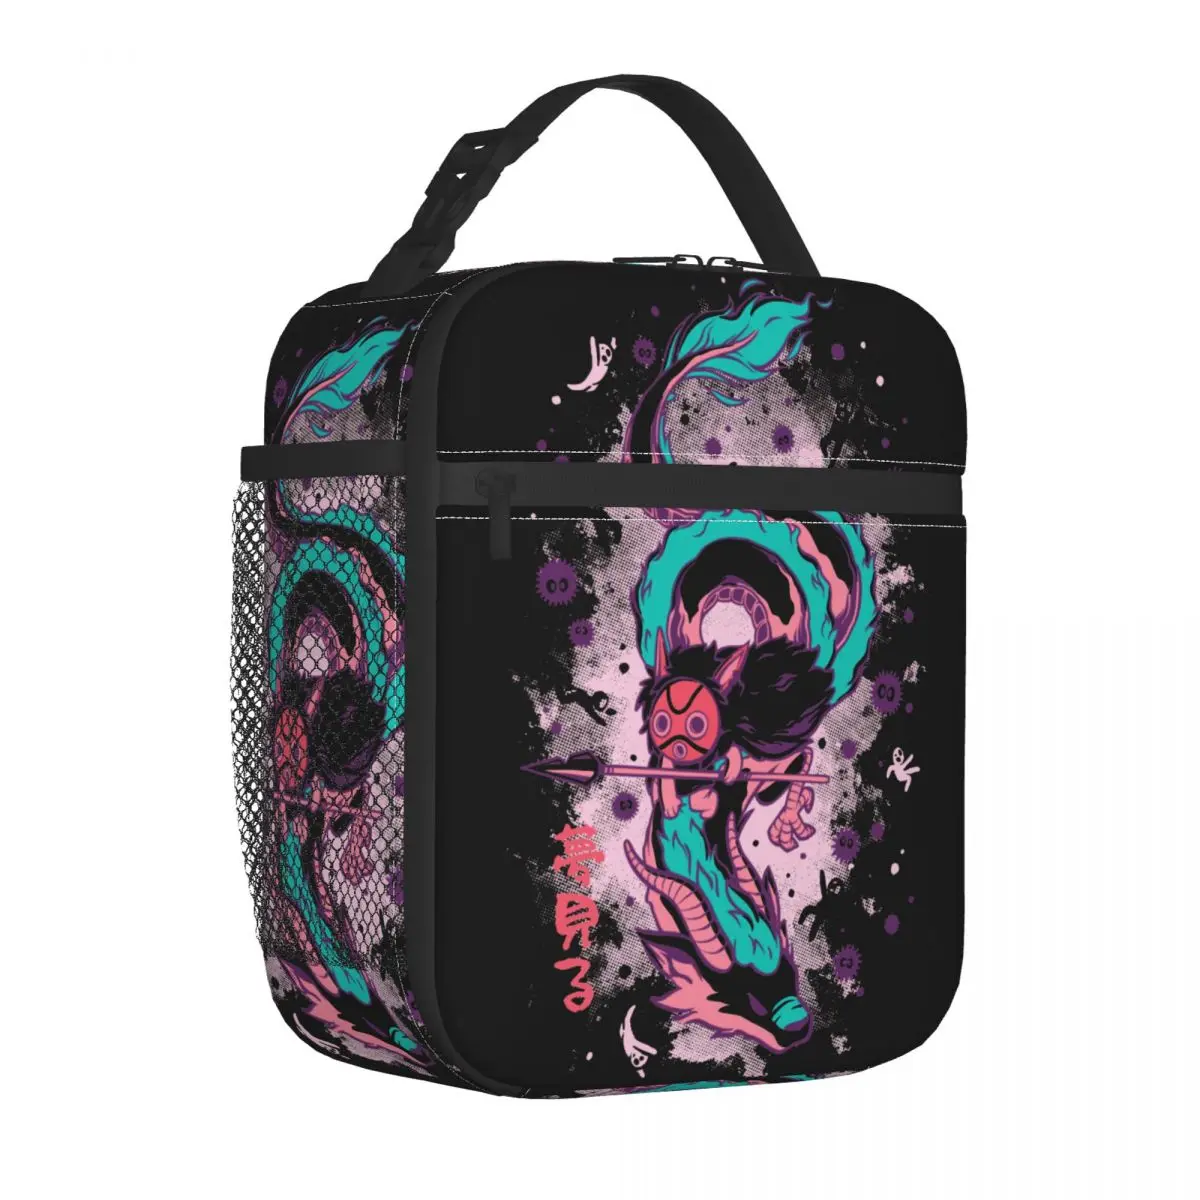 

The Princess The Dragon Insulated Lunch Bags Thermal Bag Meal Container Spirited Away Tote Lunch Box Food Handbags Beach Outdoor